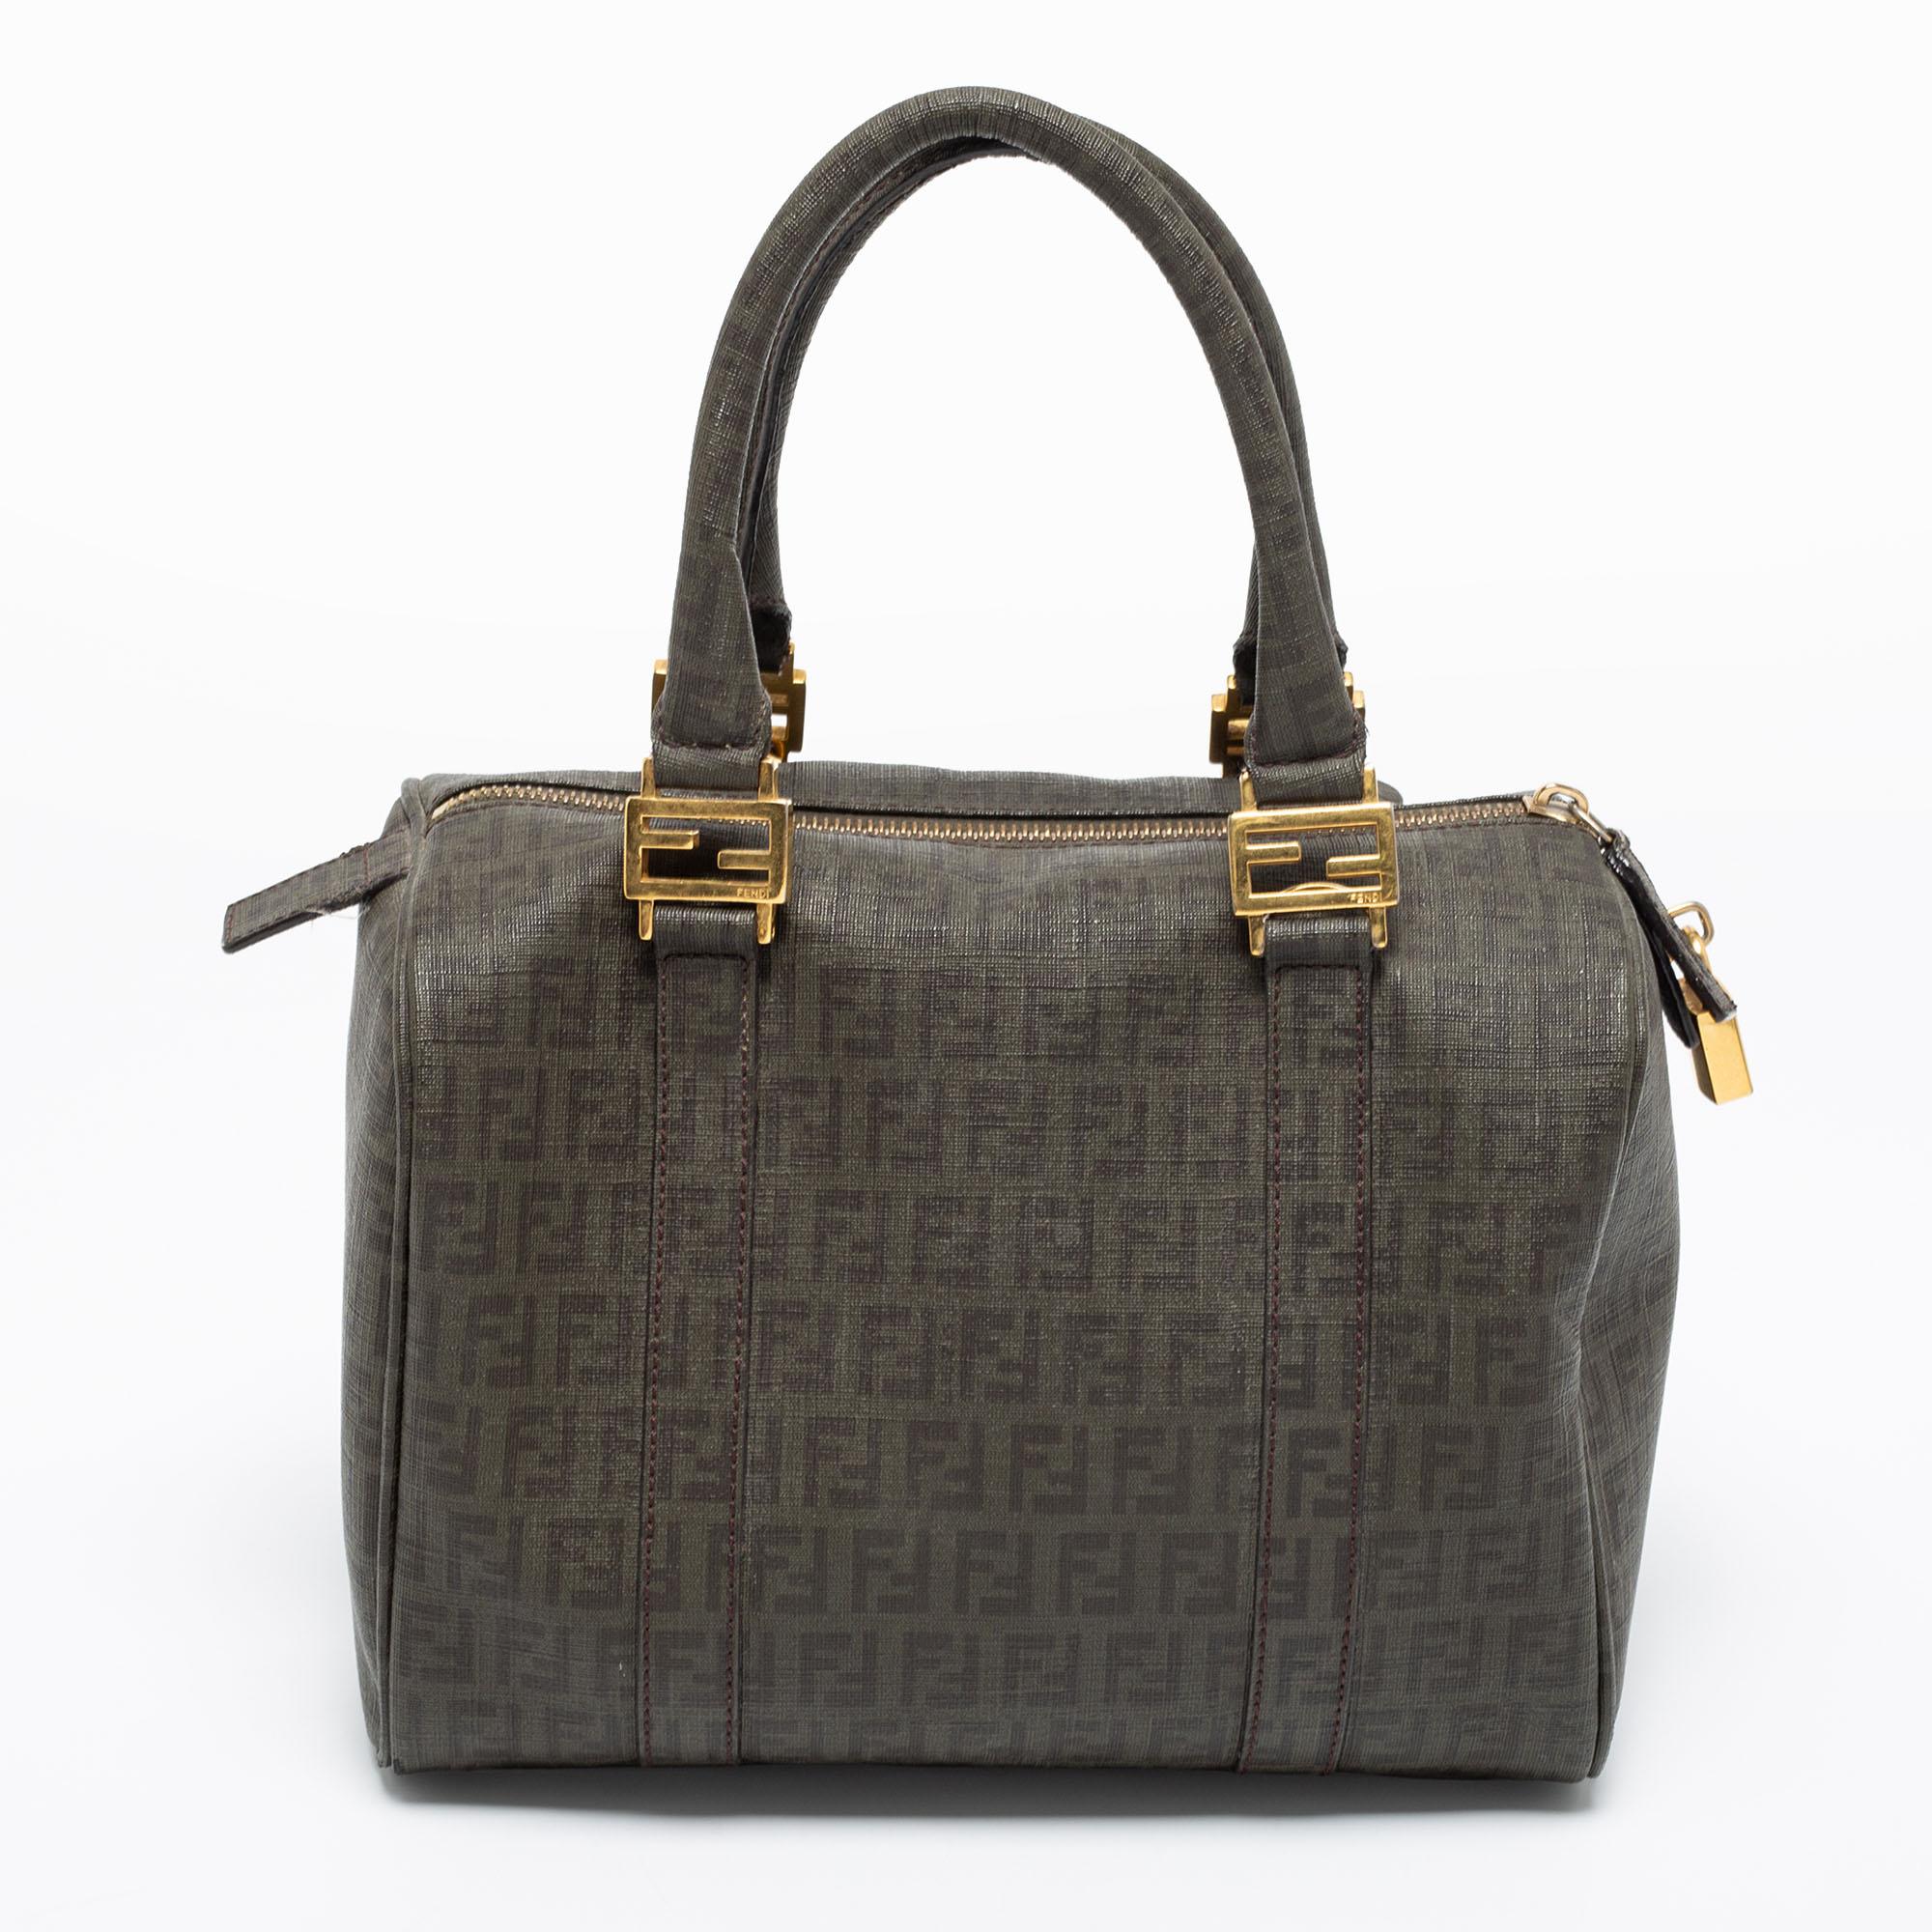 This Forever Bauletto Boston bag from the House of Fendi is both elegant and fashionable. Crafted from grey Zucchino coated canvas, this bag features dual handles, gold-tone hardware, and a fabric-lined interior. Make this stunning Boston bag your